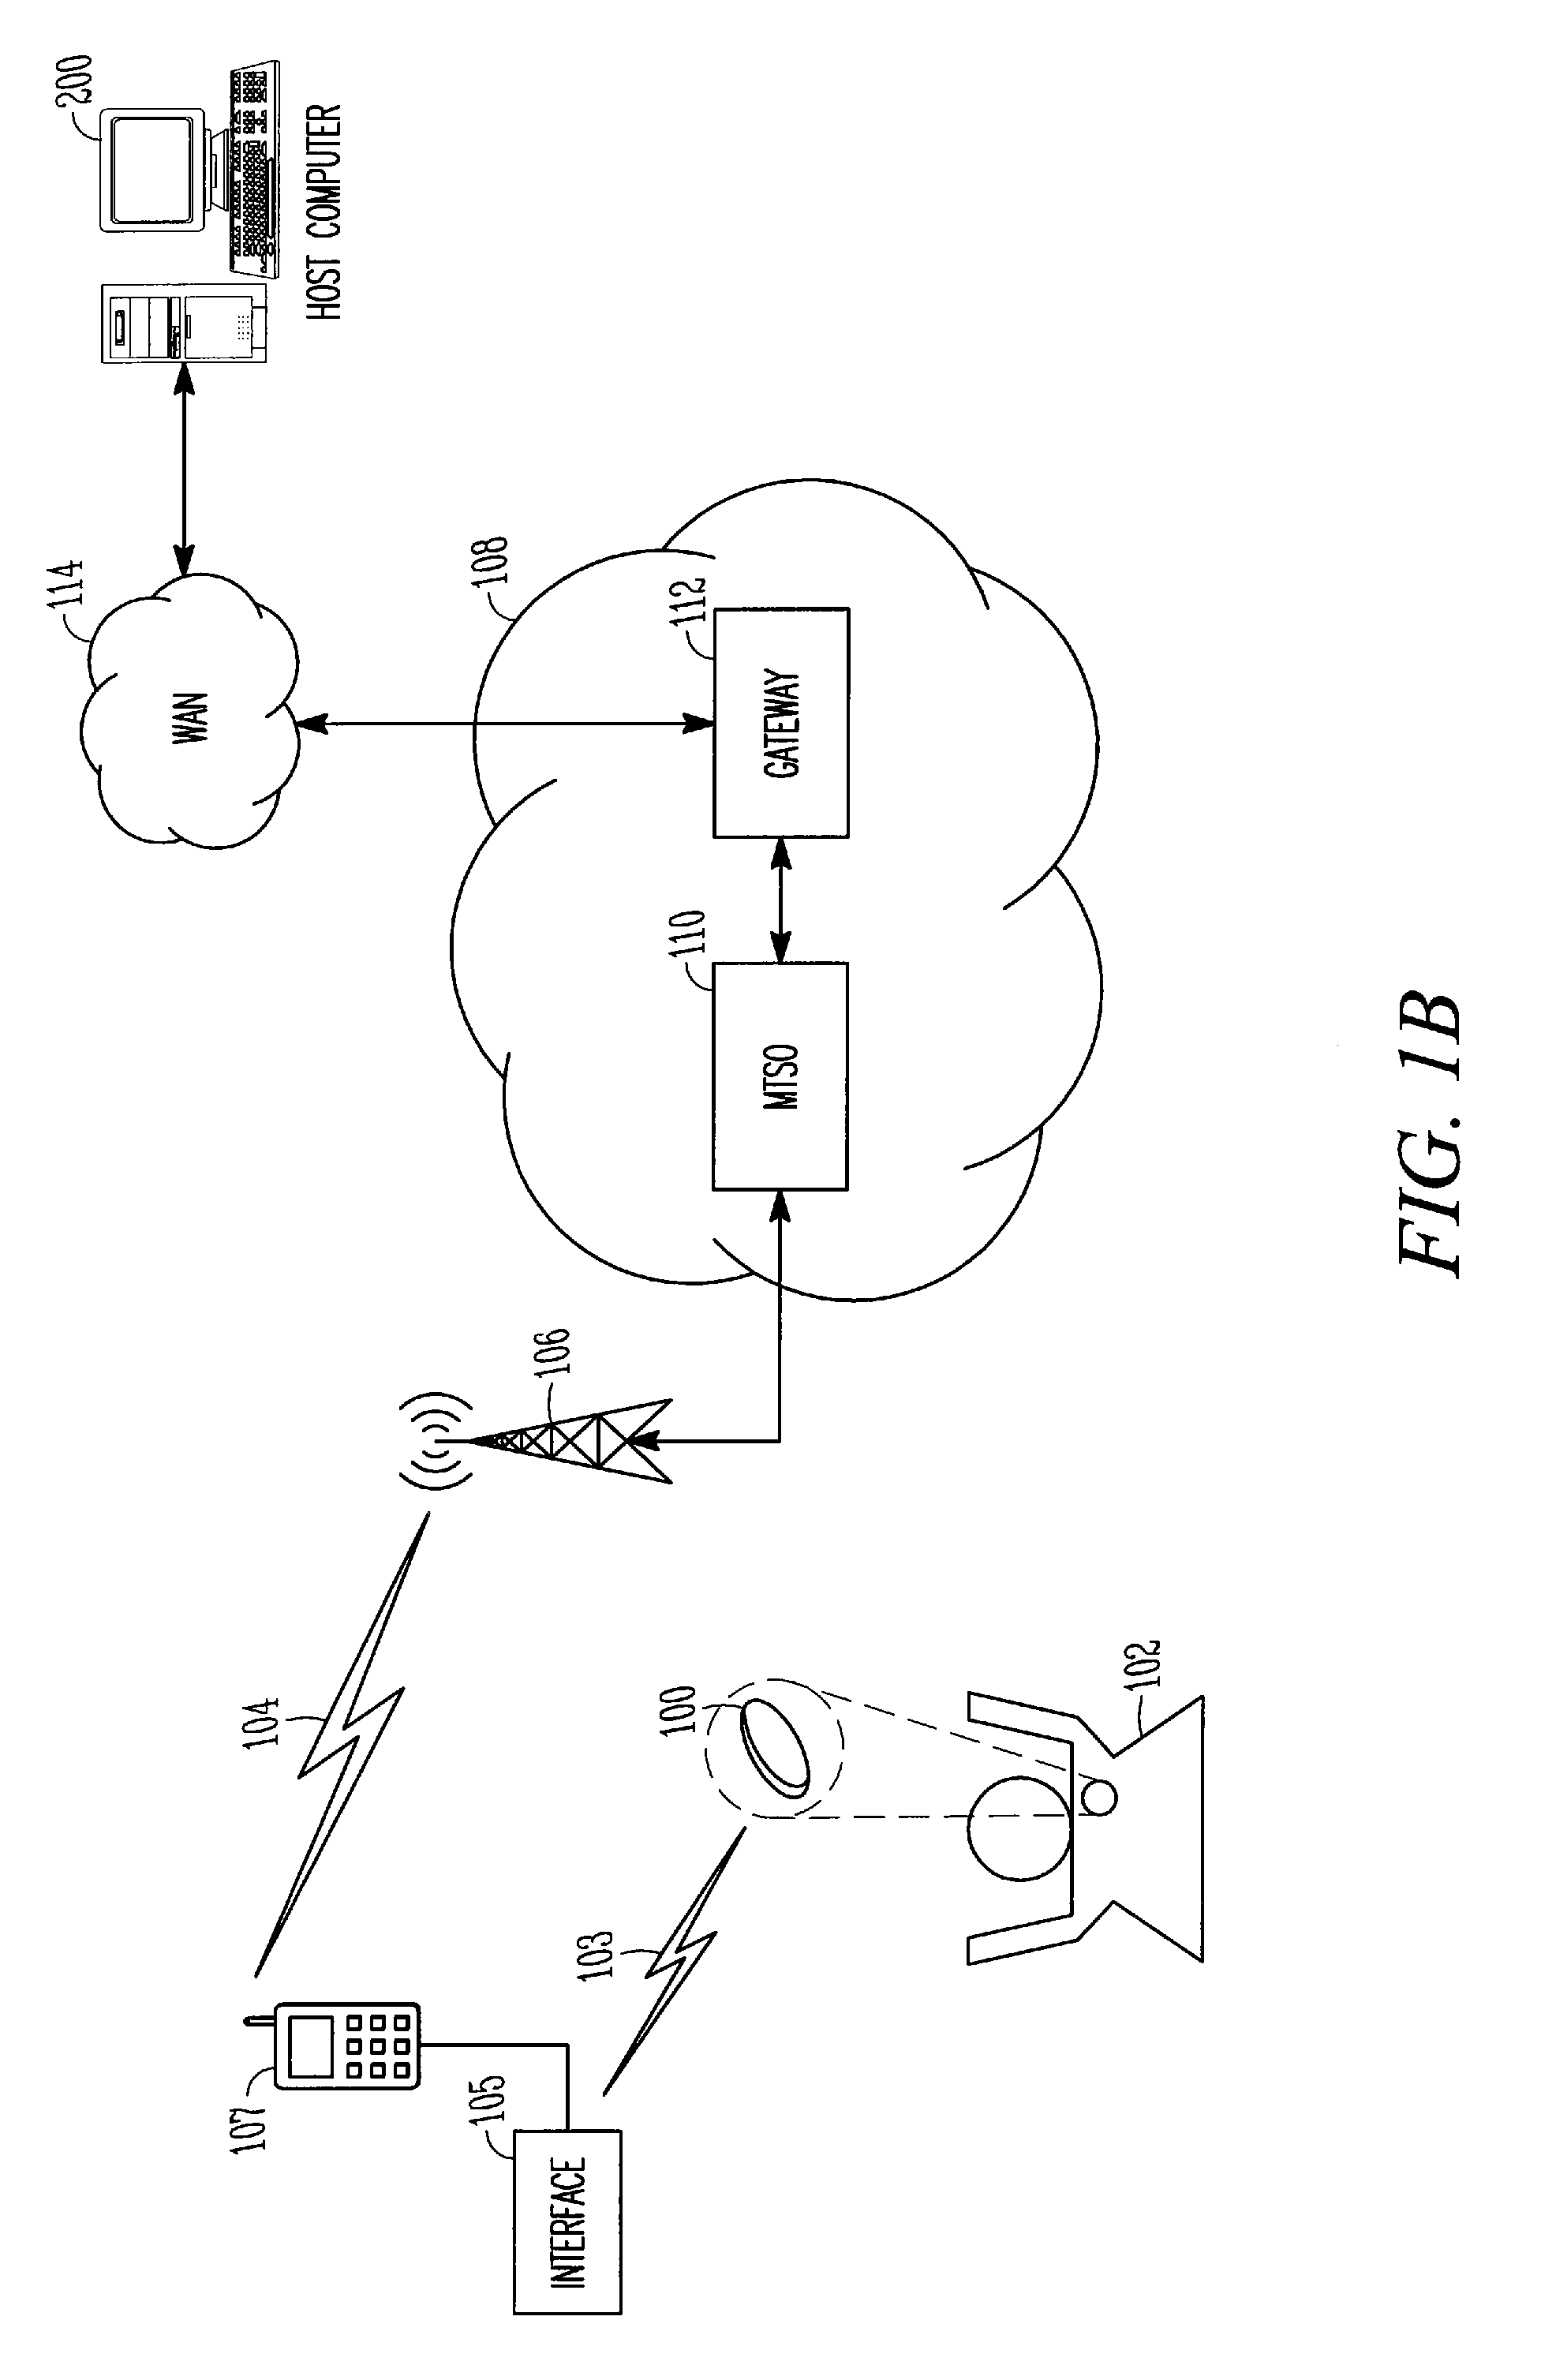 Method and apparatus for enabling data communication between an implantable medical device and a patient management system